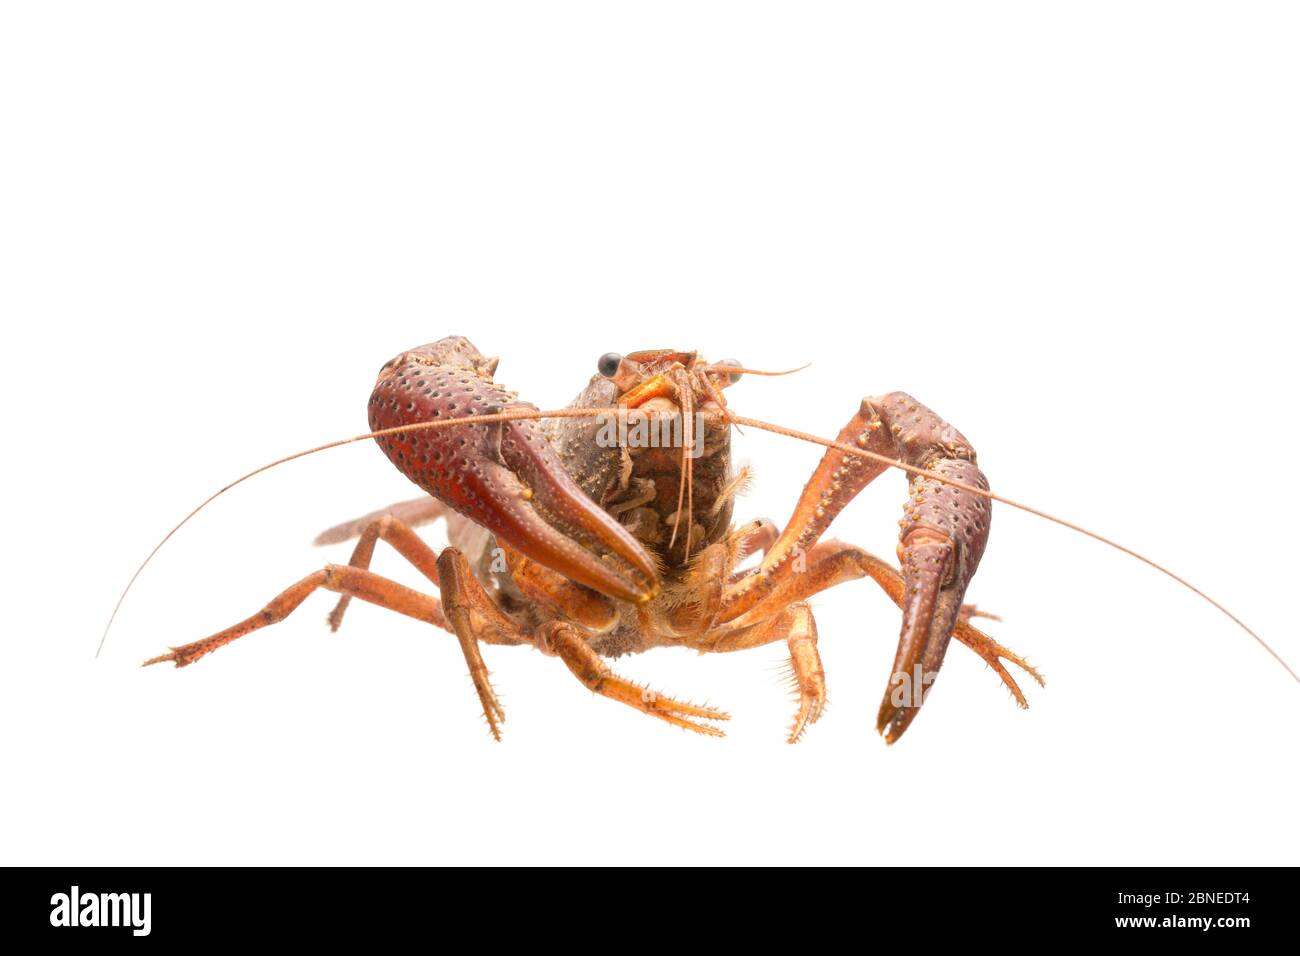 White river crayfish (Procambarus acutus) adult, The Netherlands, May, Meetyourneighbours.net project Stock Photo